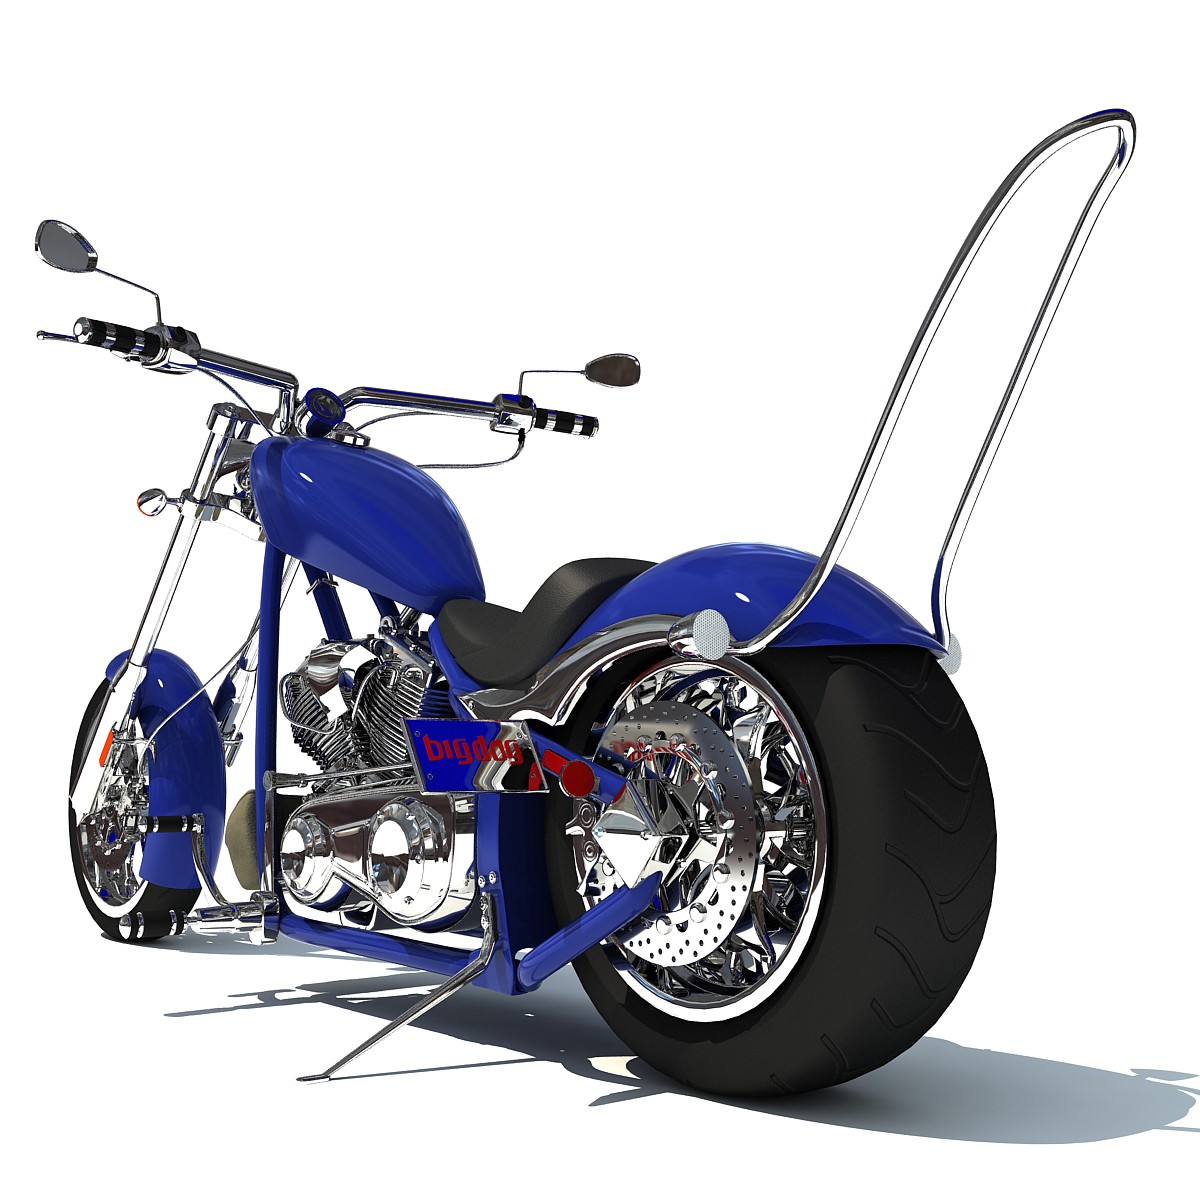 Cartoon Pictures Of Motorcycles - ClipArt Best